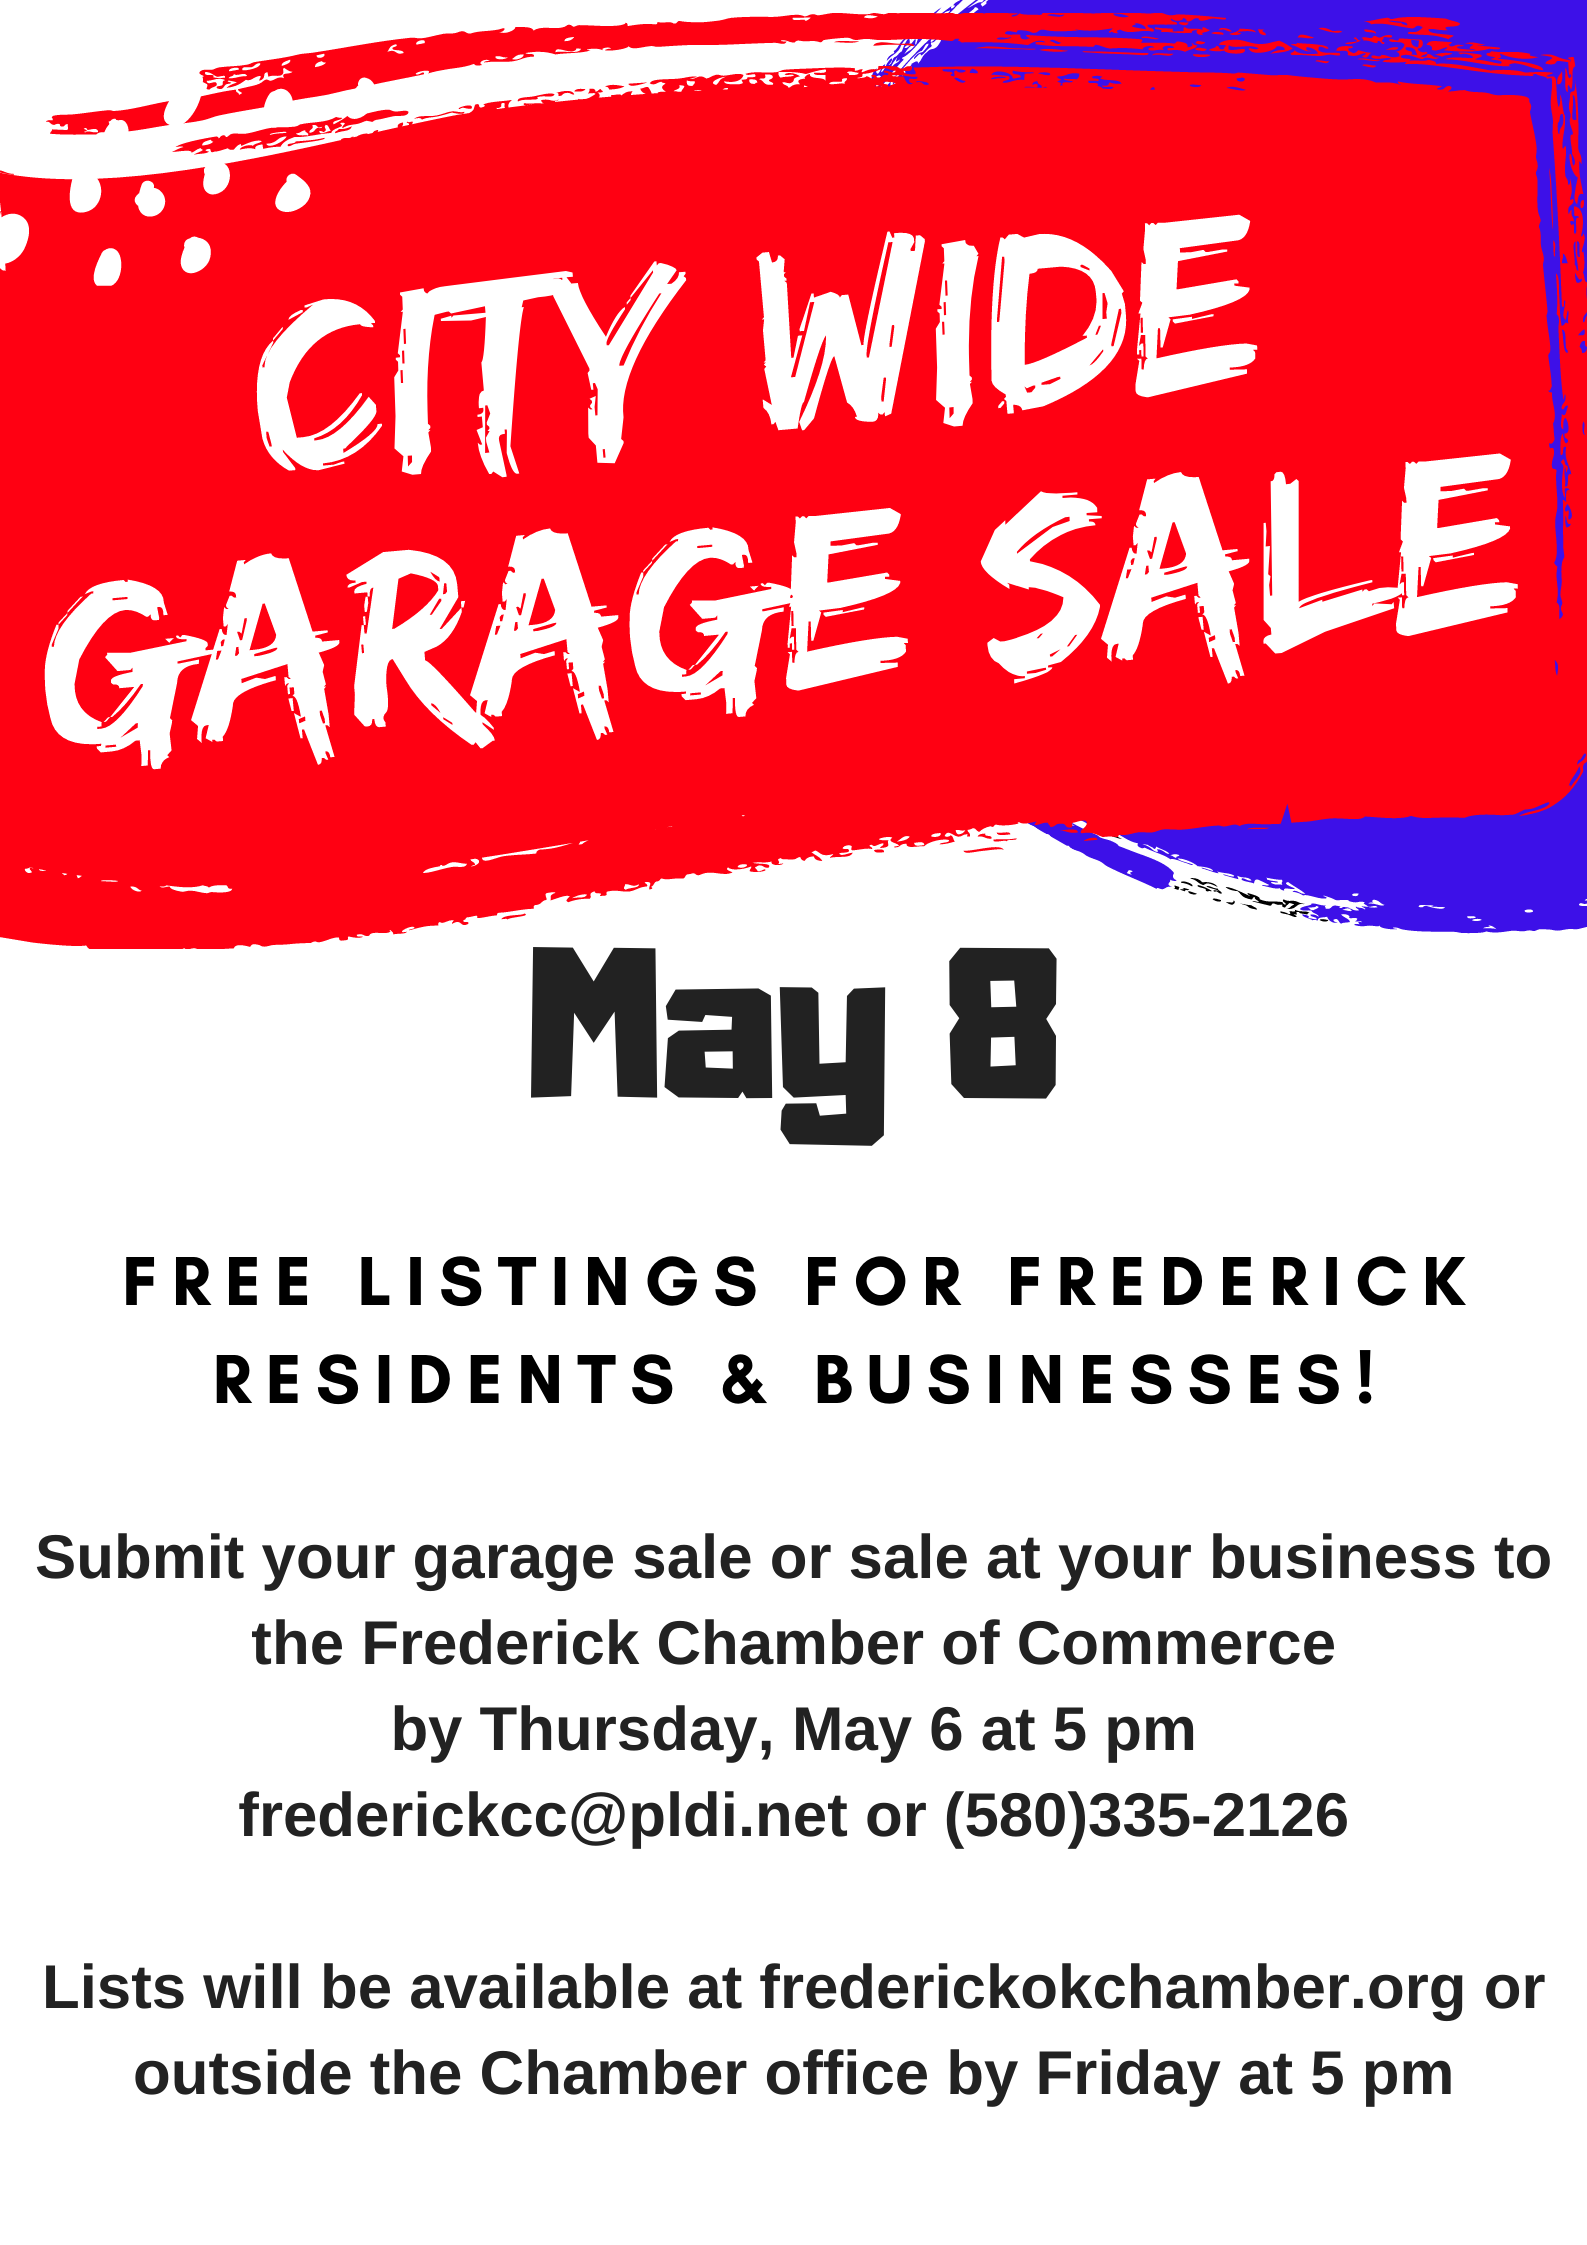 City Wide Garage Sale List Frederick Chamber of Commerce